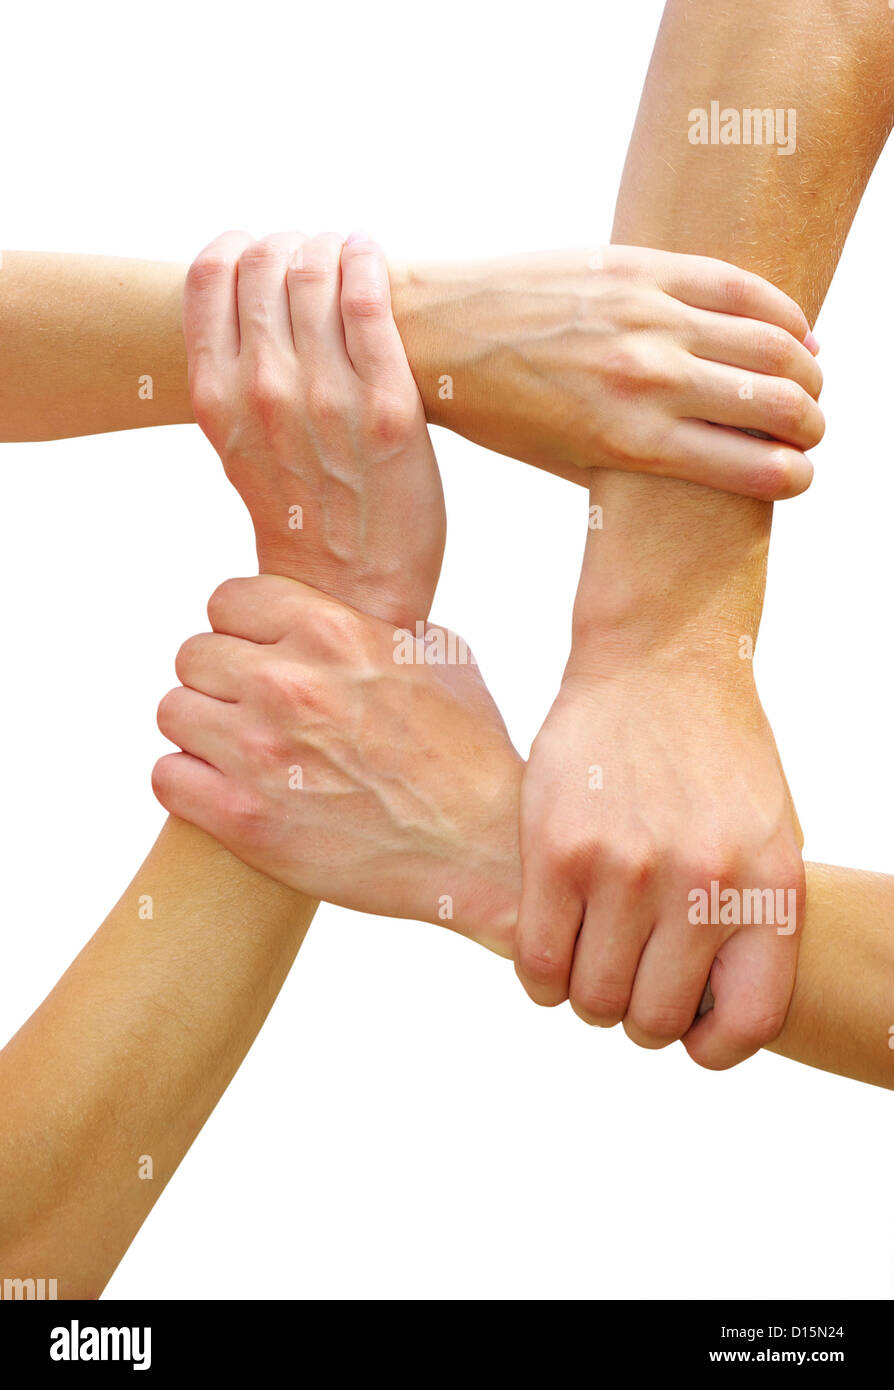 Linked hands on a white background symbolizing teamwork and friendship Stock Photo